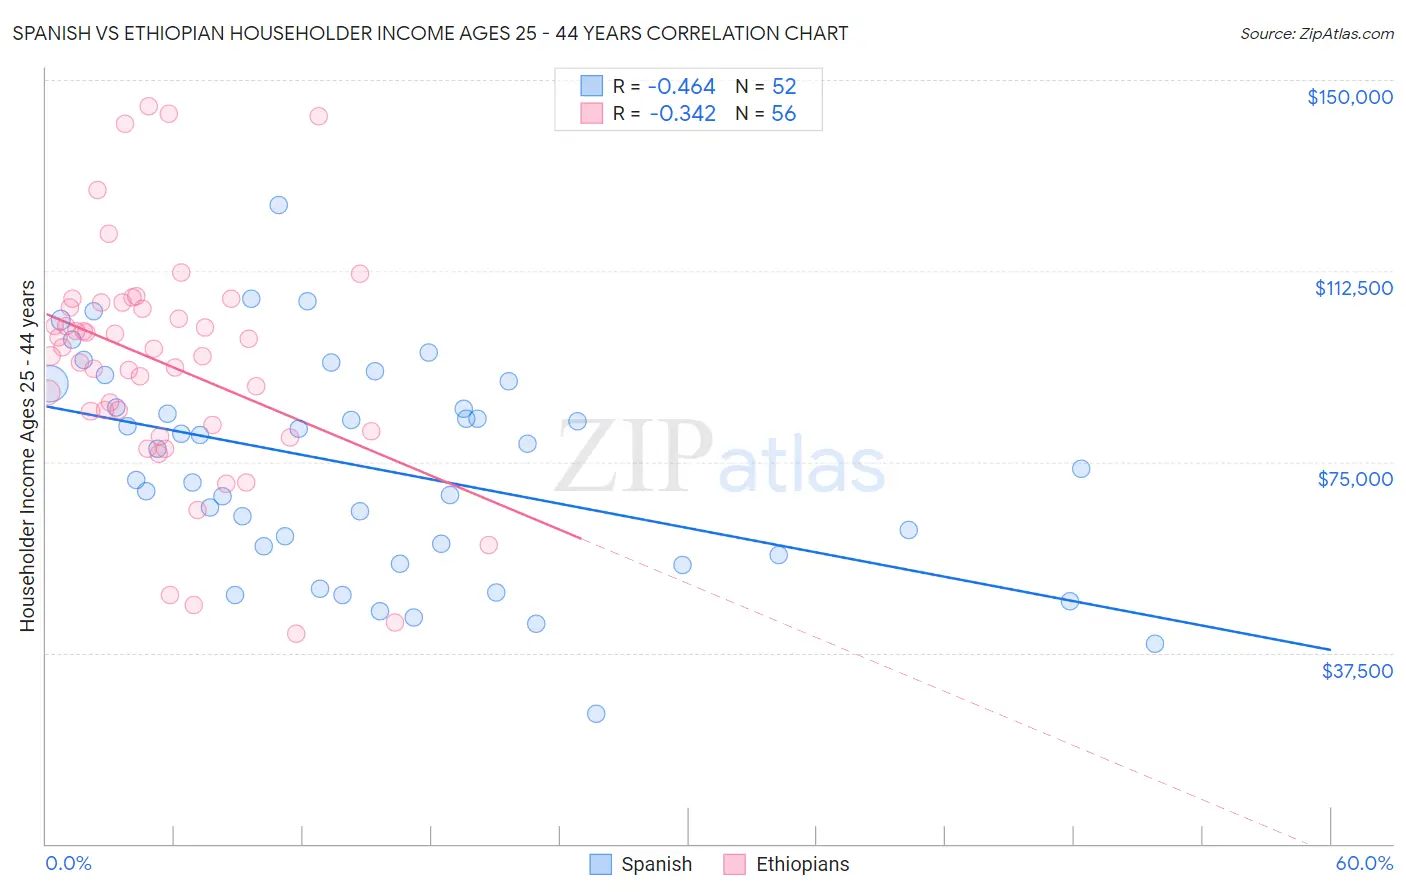 Spanish vs Ethiopian Householder Income Ages 25 - 44 years